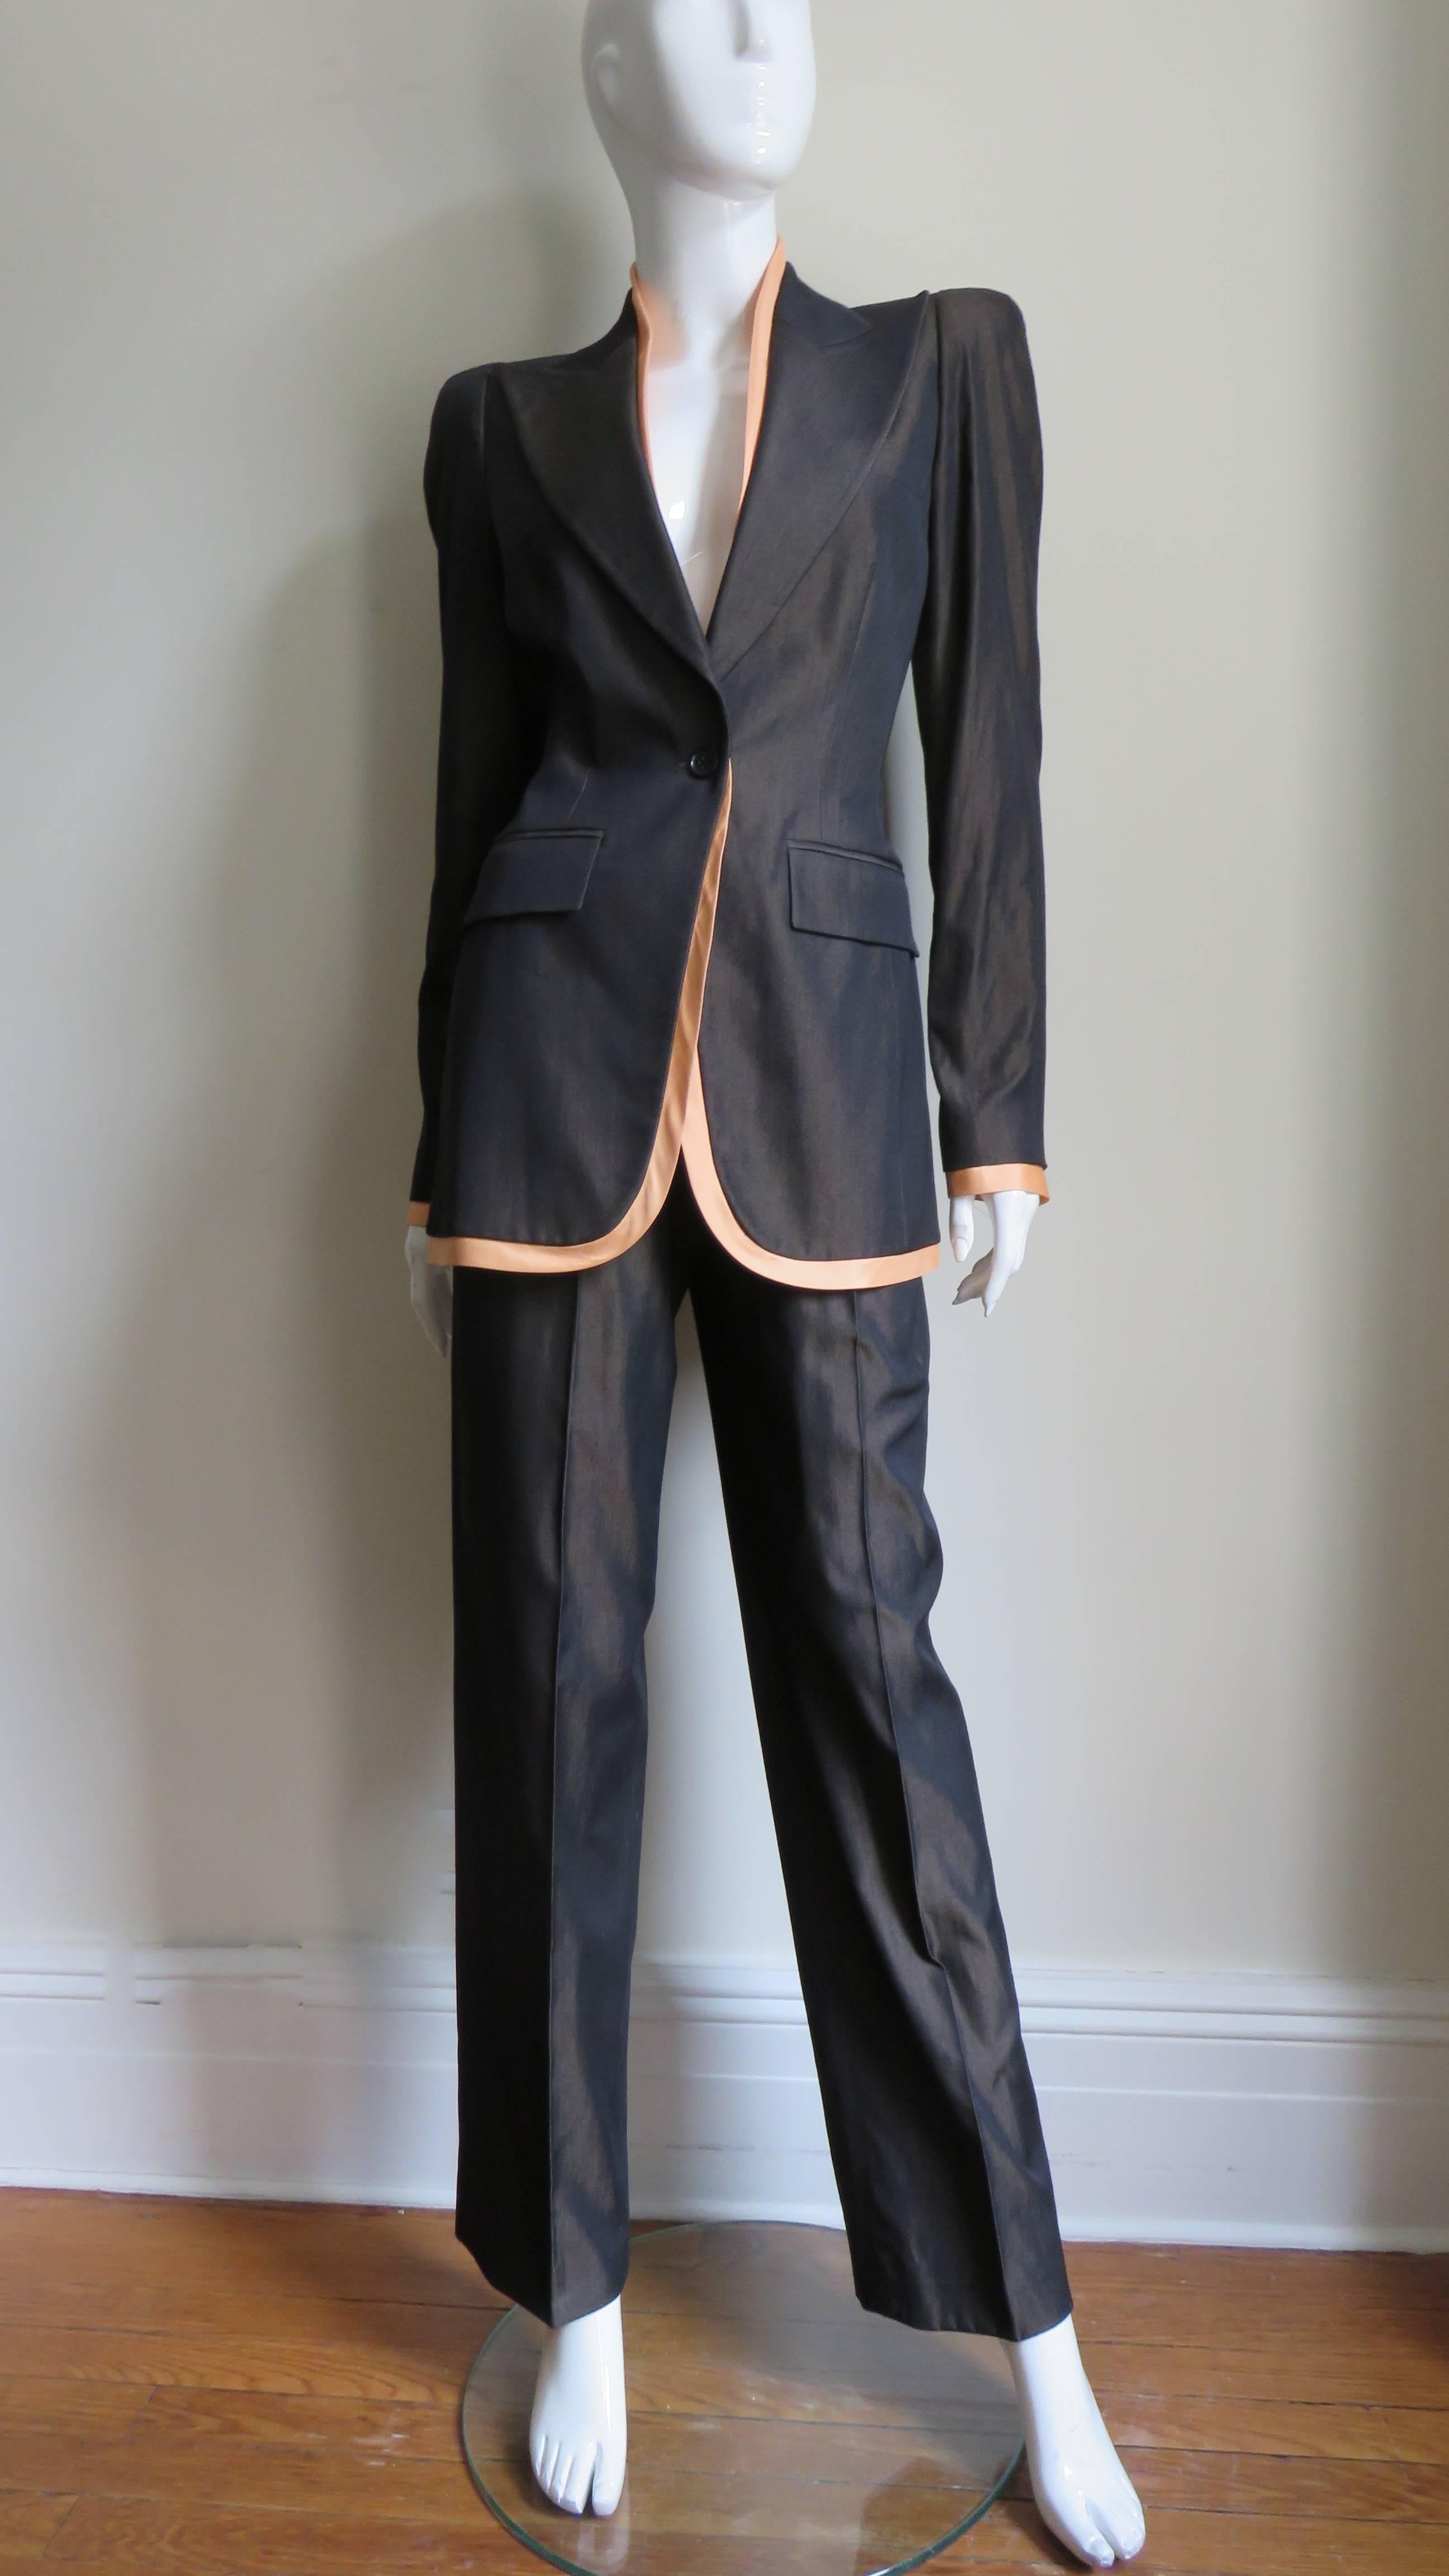 A fabulous brown silk suit from an early Alexander McQueen collection.  The long jacket has shoulder padding, peak lapels, flap pockets, a breast pocket and one button closure.  There is an slim inset of nude silk inside peeking out of the neckline,